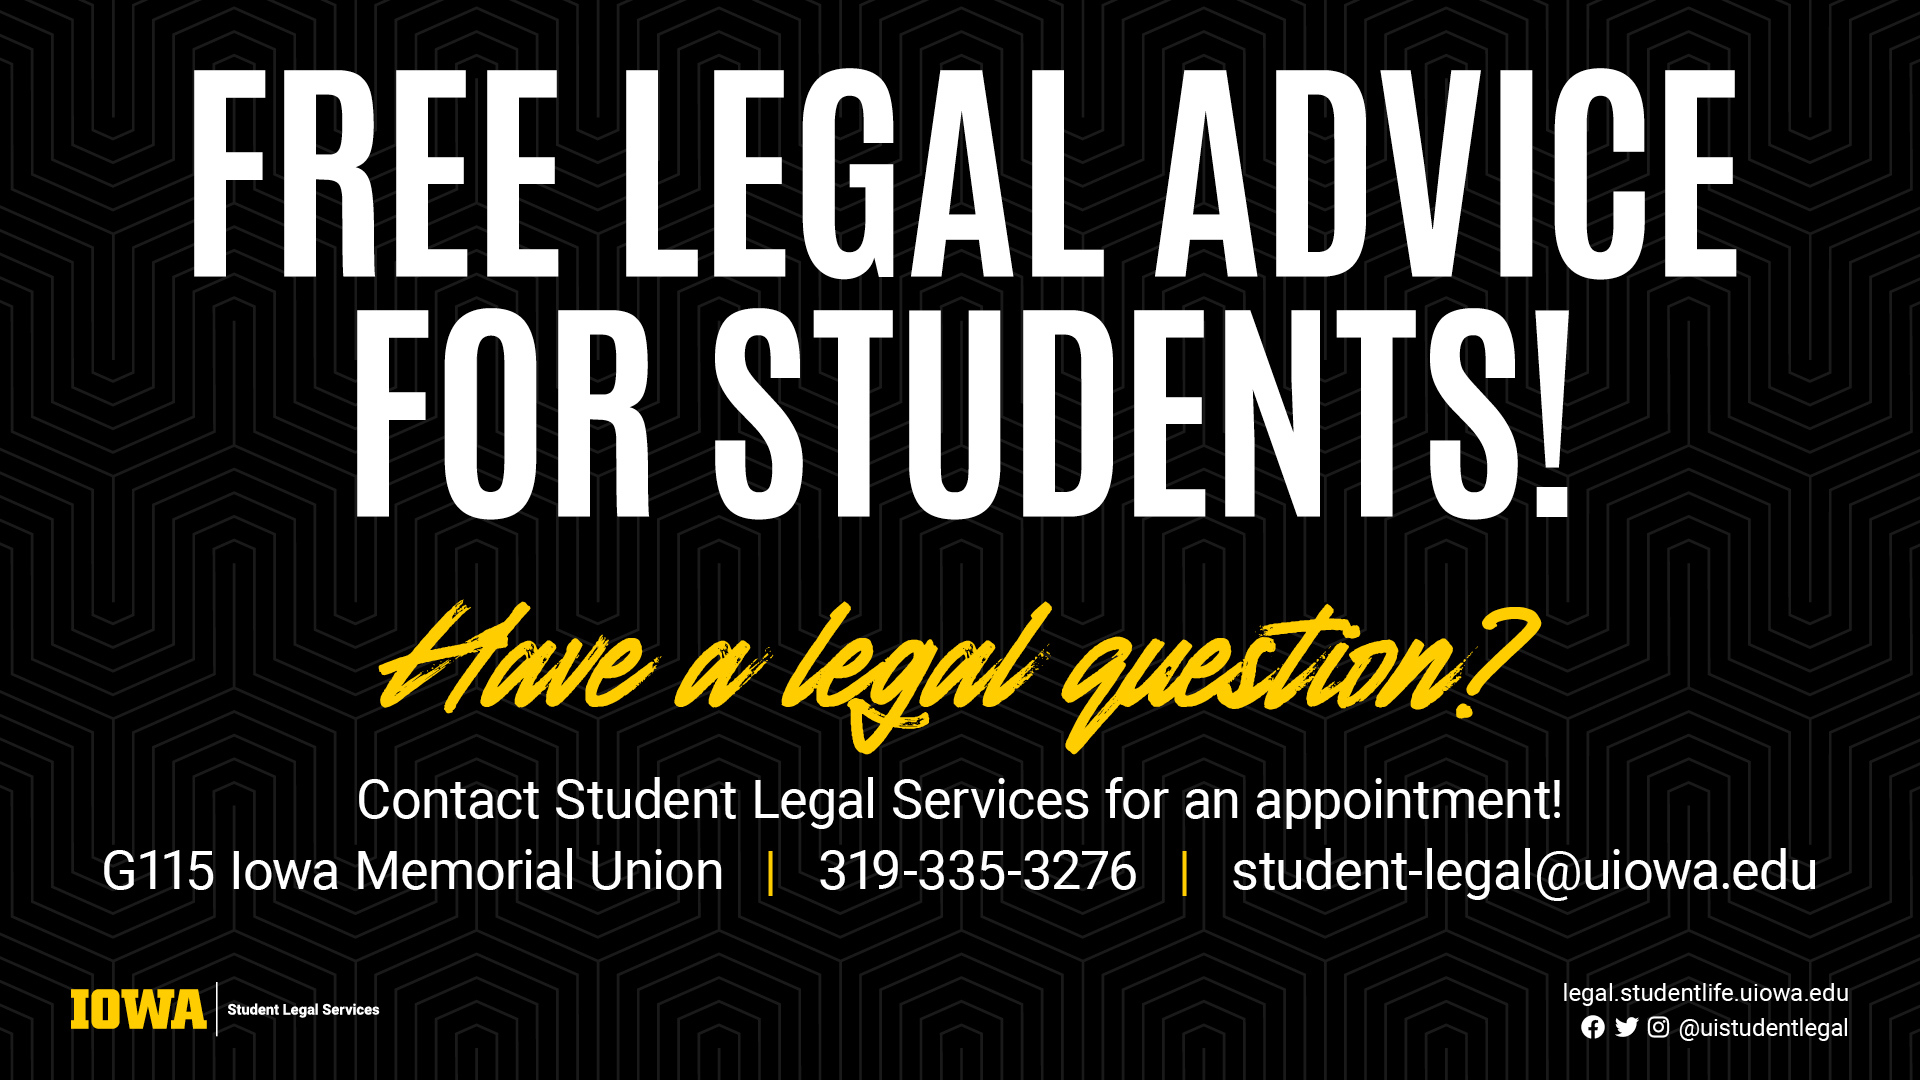 Free legal advice for students! Have a legal question? Contact student legal services for an appointment! G115 Iowa Memorial Union | 319-335-3276 | student-legal@uiowa.edu